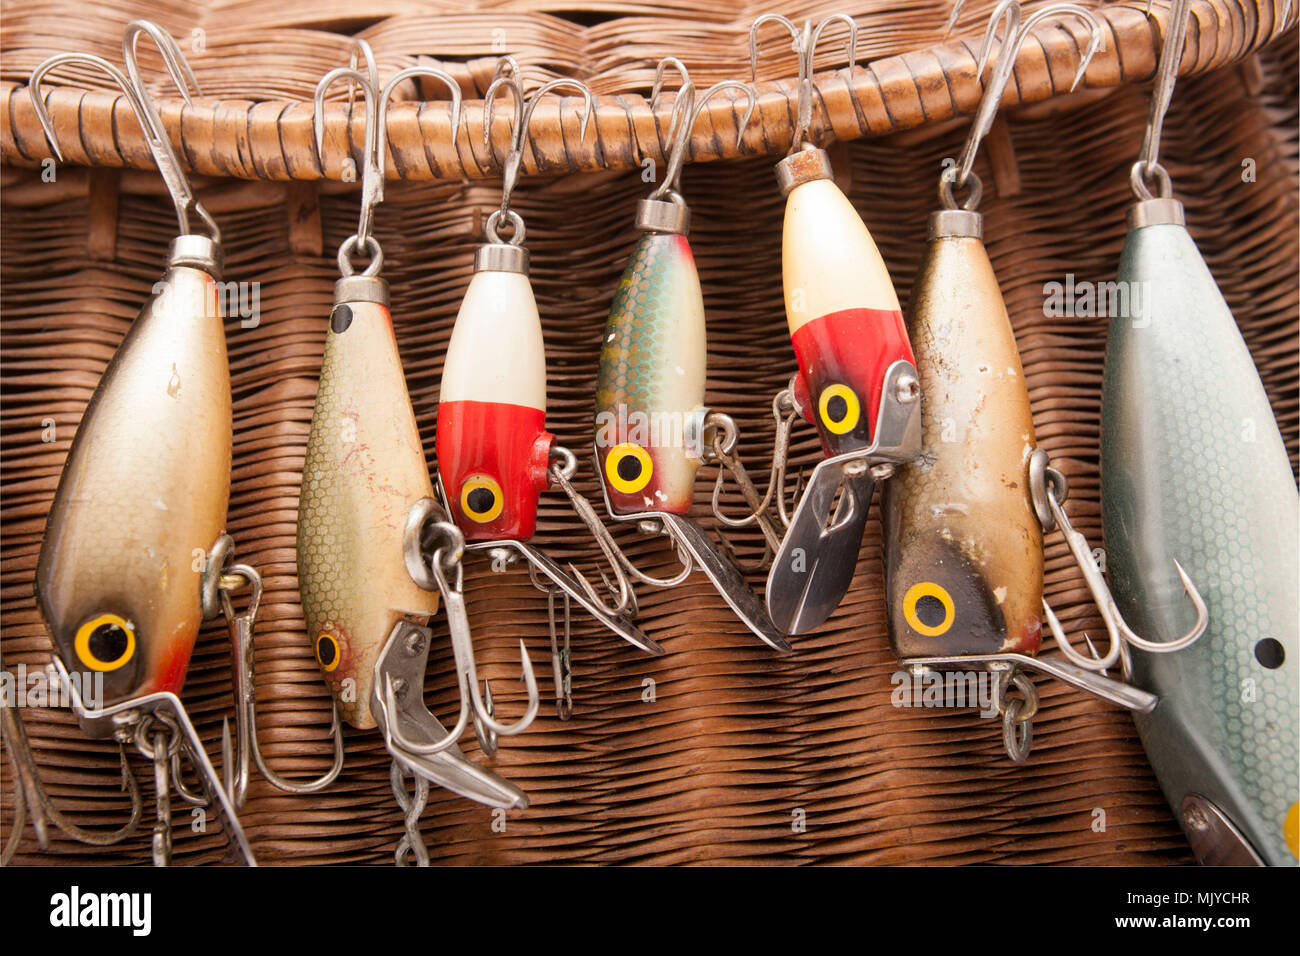 A selection of vintage fishing lures, also known as plugs, possibly made by Woods MFG. They are shown displayed on a woven fishing creel. Dorset Engla Stock Photo